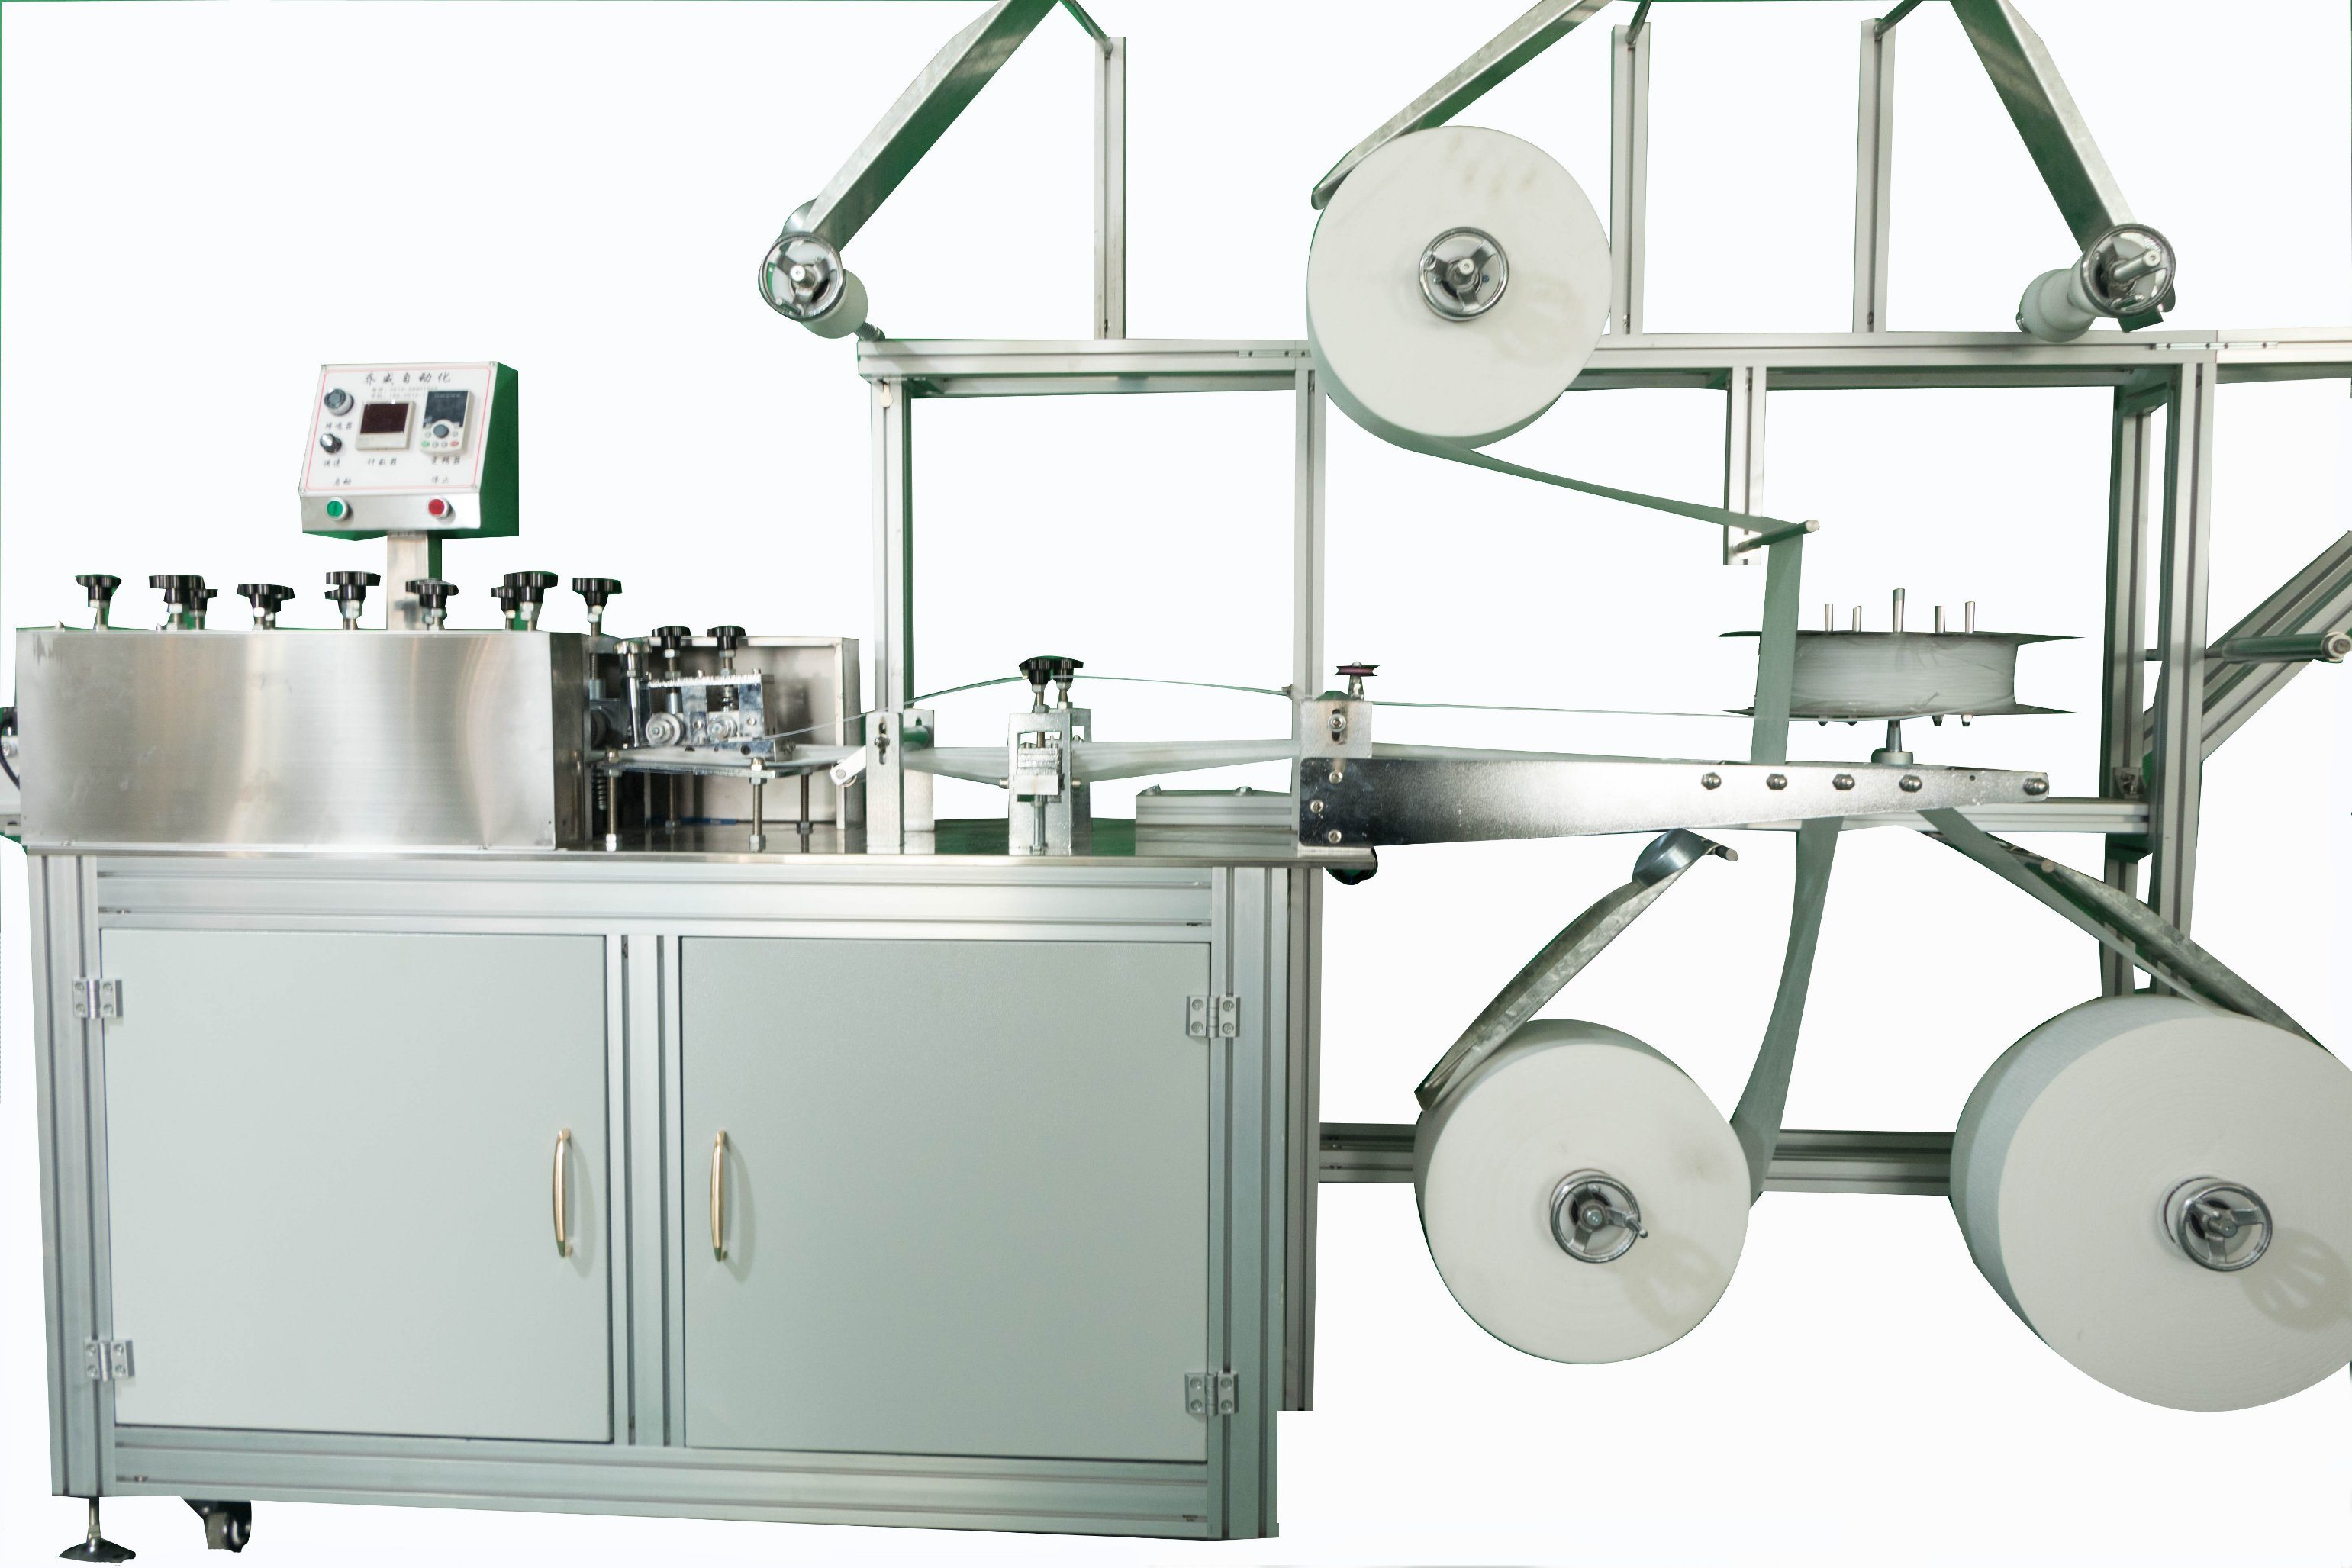 Joy Well Mask Making Machine with Full Process Automation (Practical Type)